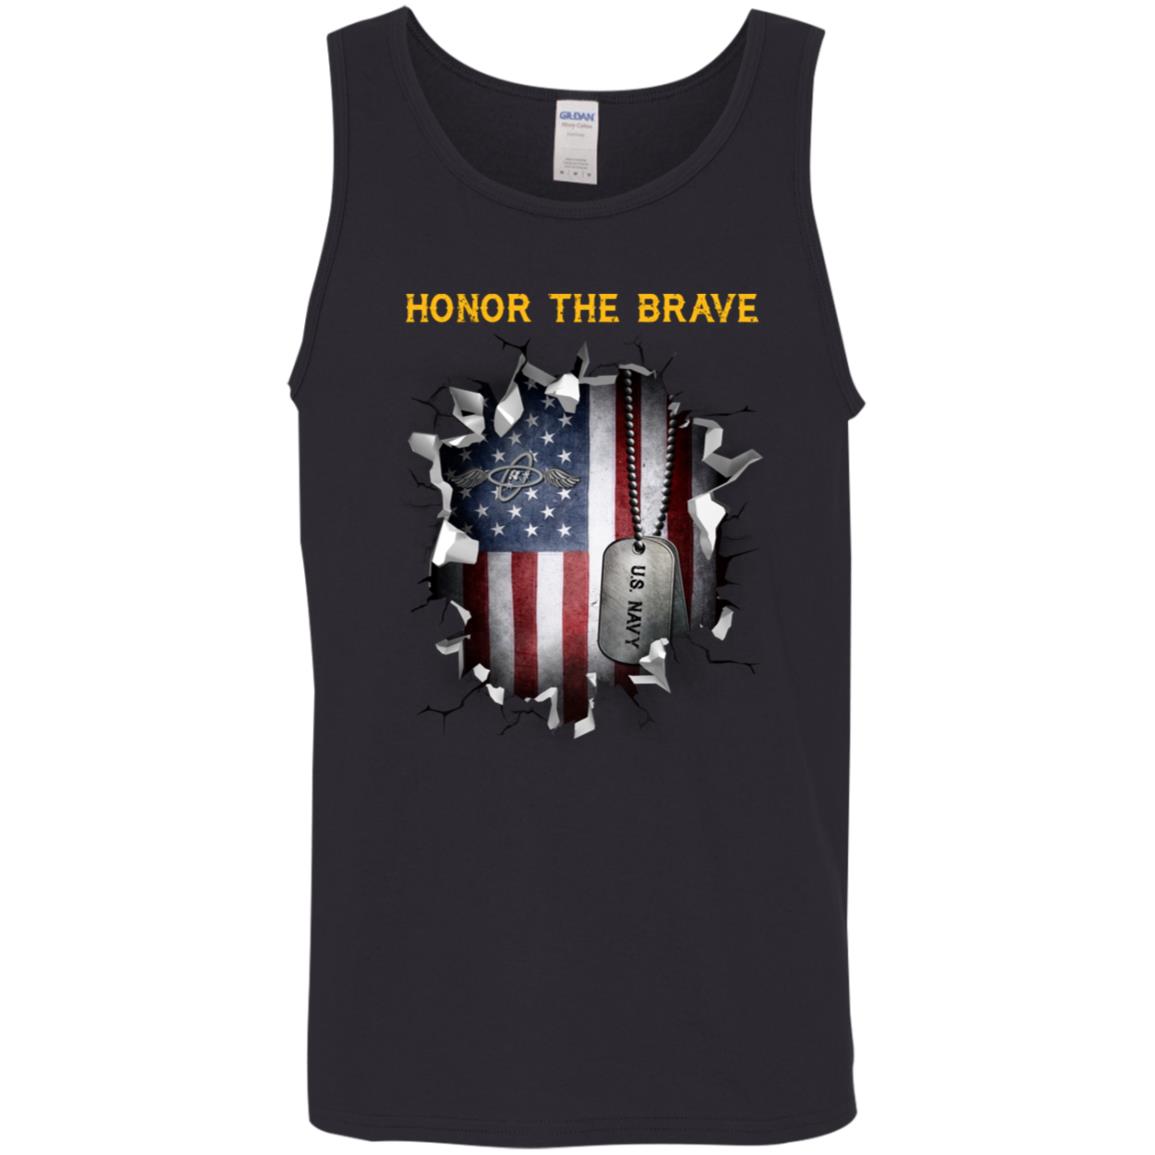 Navy Aviation Electronics Technician Navy AT - Honor The Brave Front Shirt